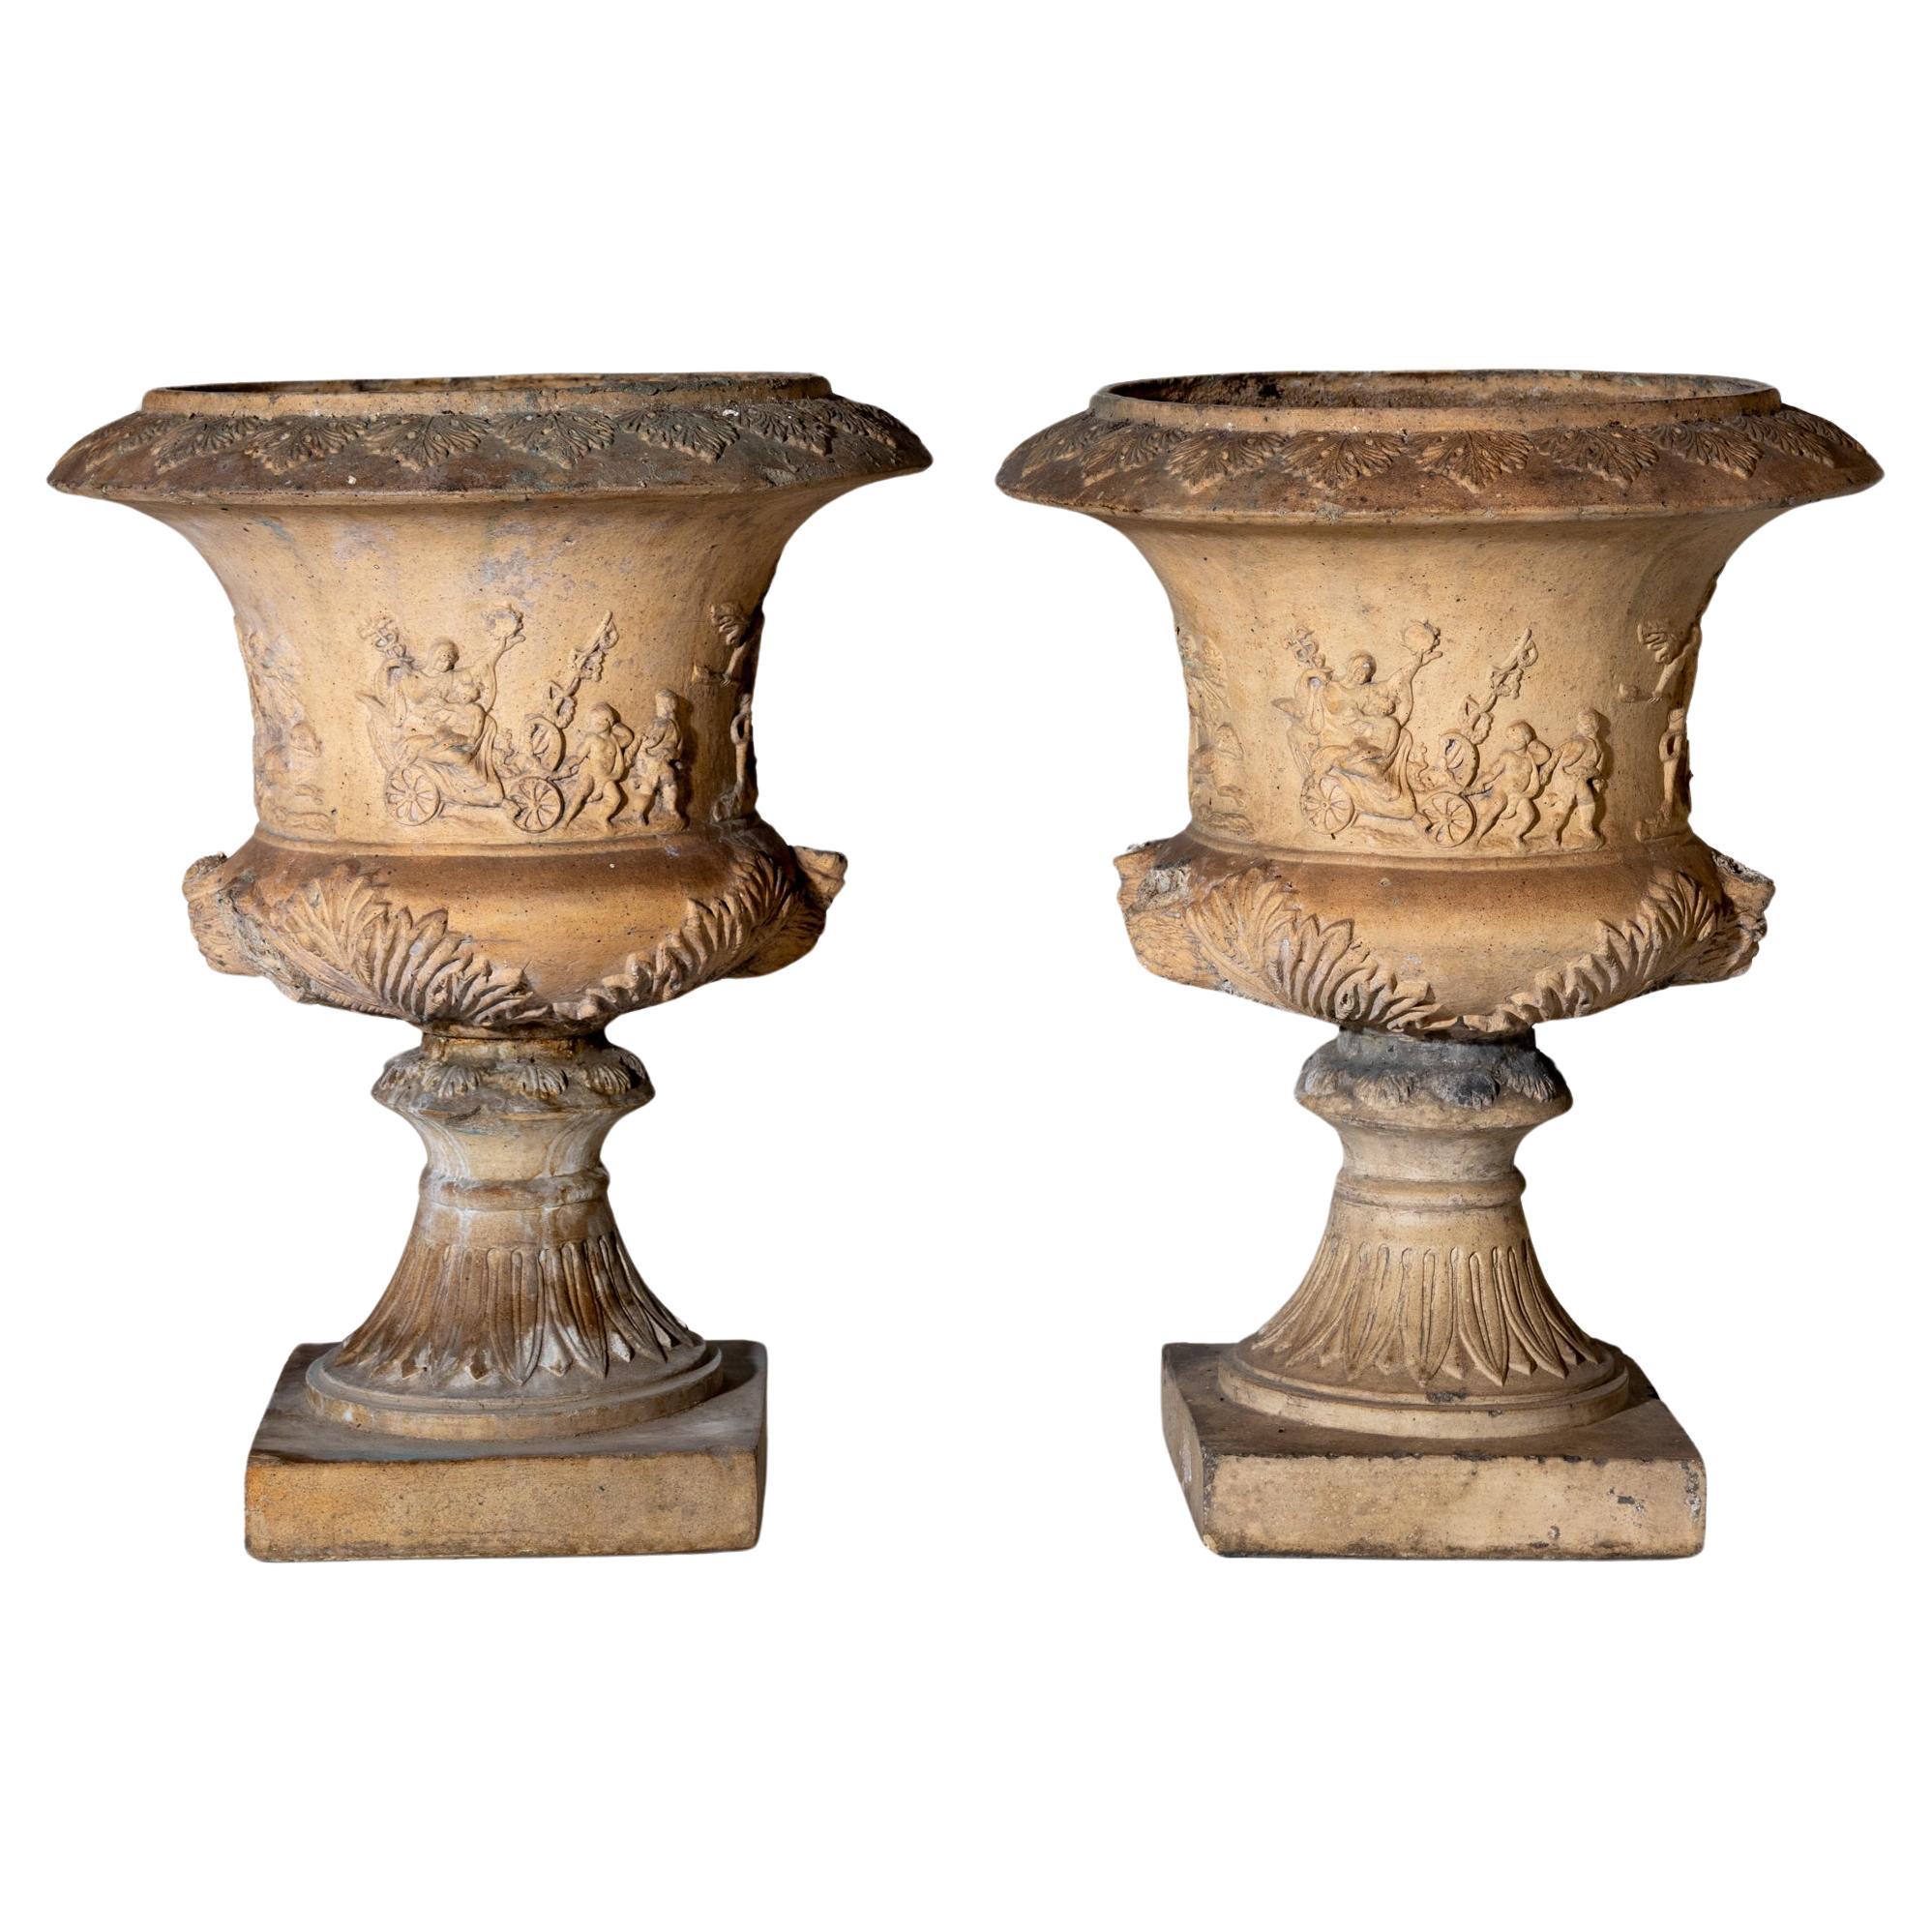 Terracotta Crater Vases, Italy 2nd Half 19th Century For Sale